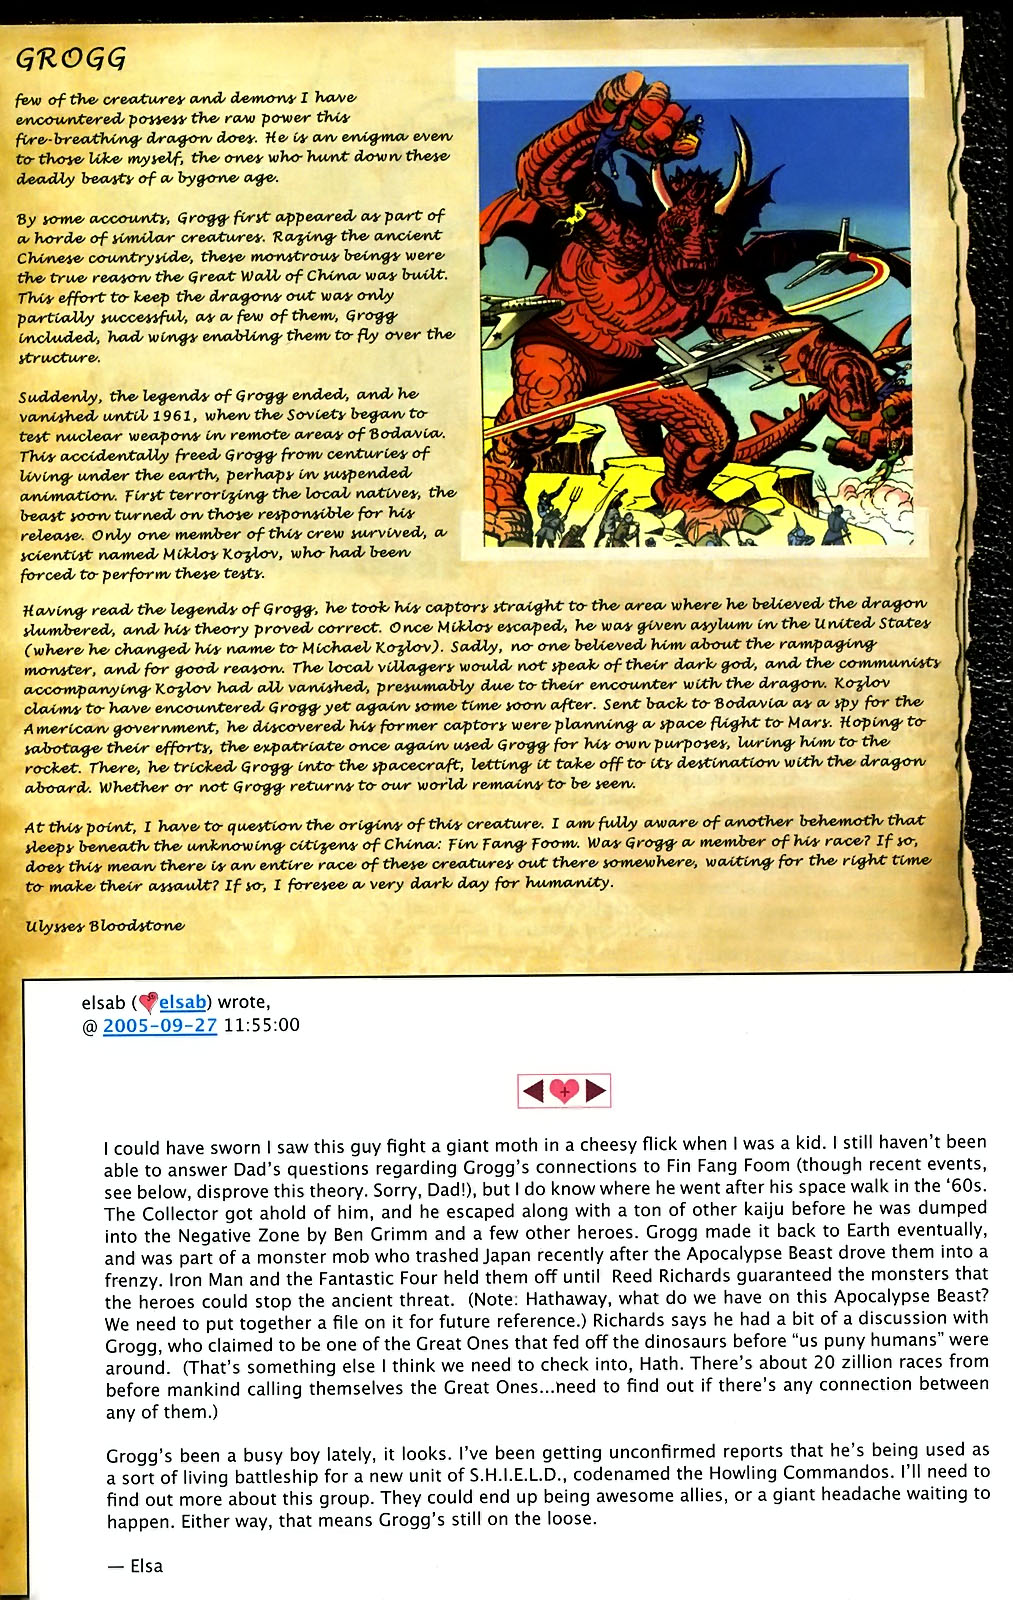 Read online Marvel Monsters: From the Files of Ulysses Bloodstone (and the Monster Hunters) comic -  Issue # Full - 15